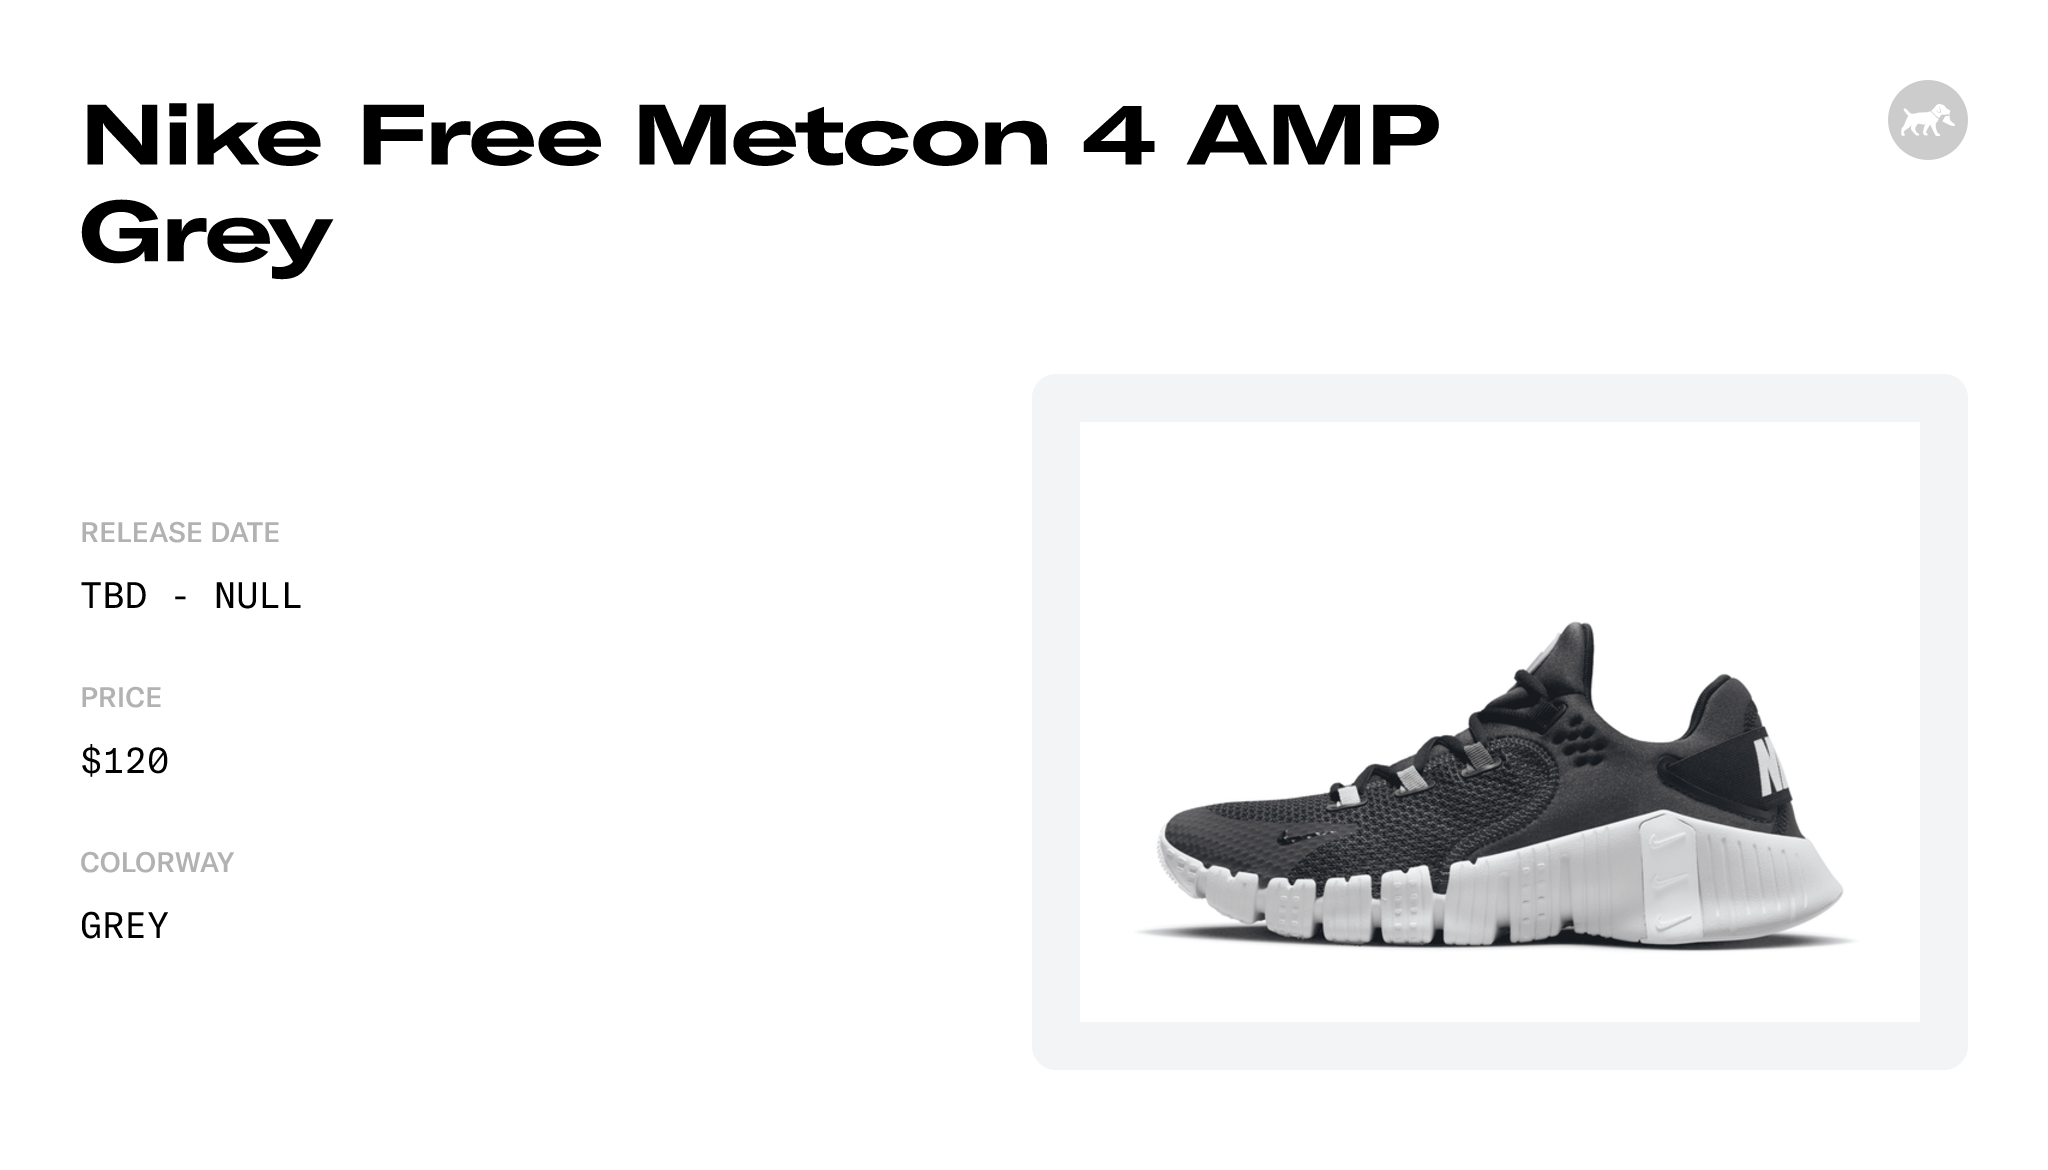 Nike Free Metcon 4 AMP Grey - DZ6326-001 Raffles and Release Date